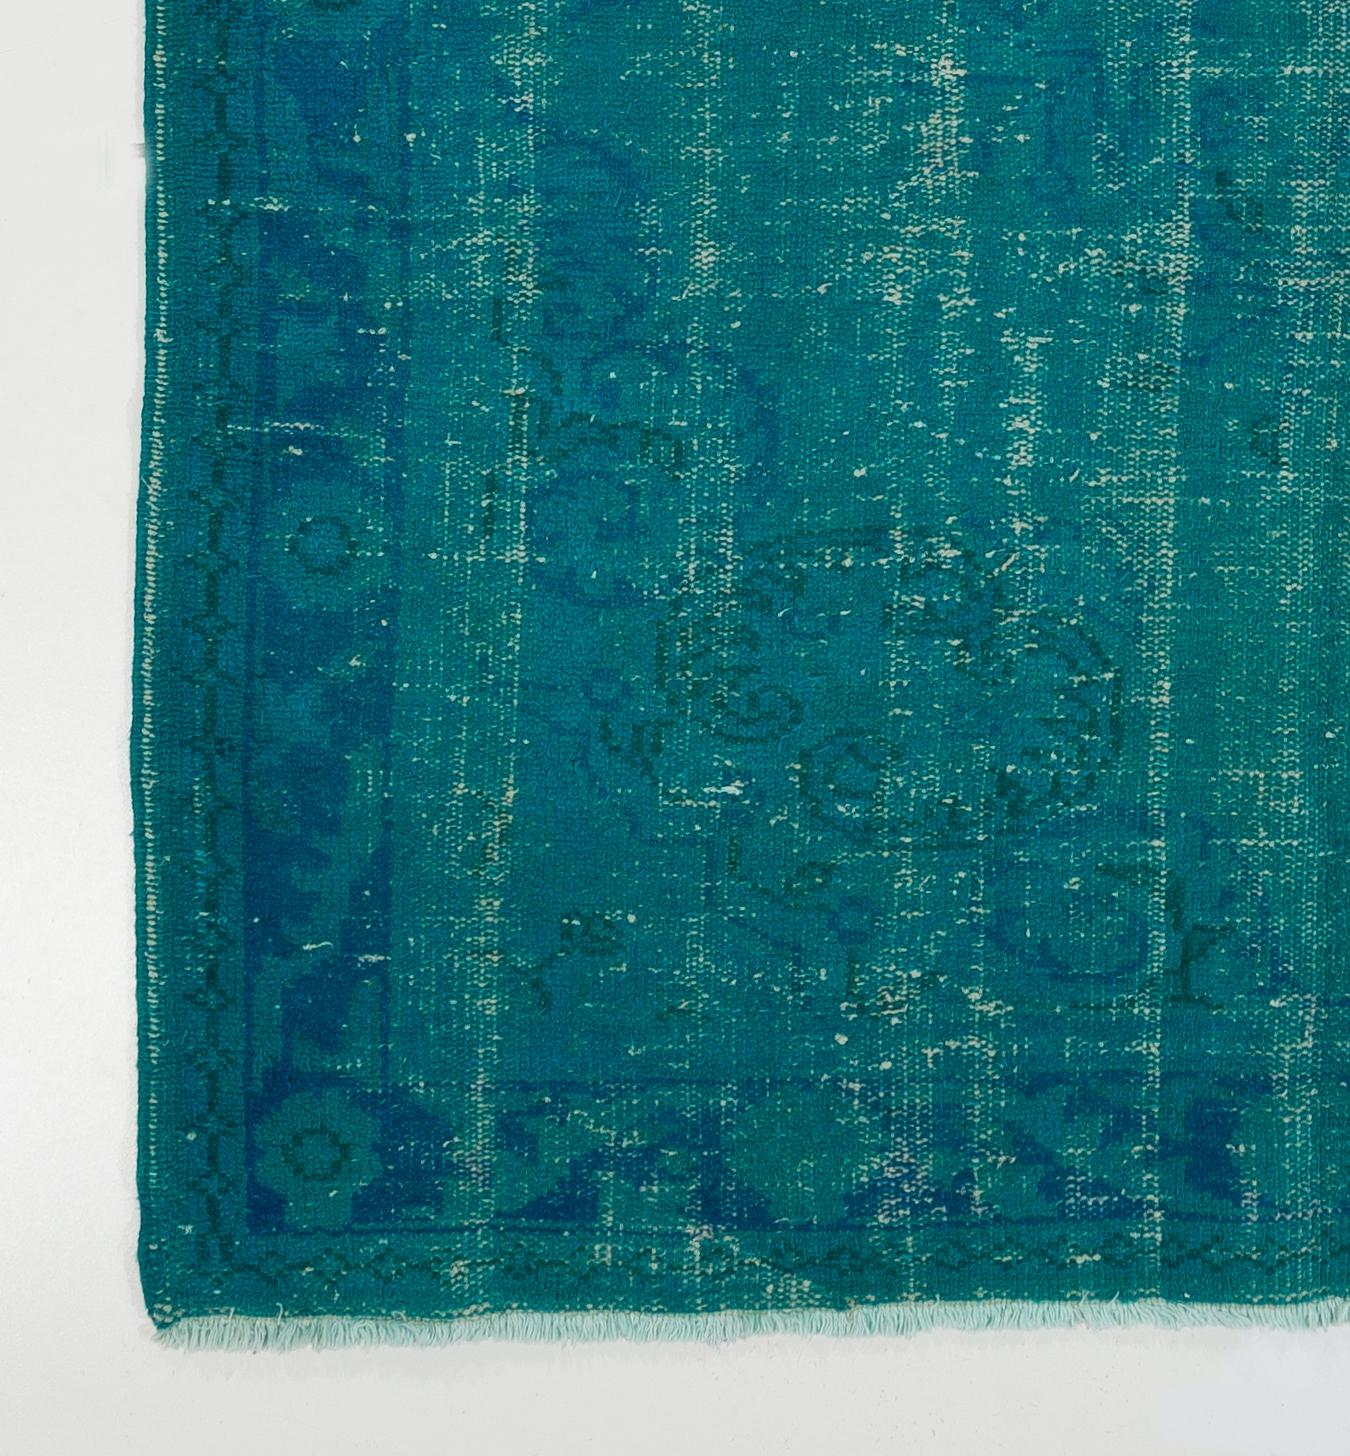 Mid-20th Century 6.2x10.4 Ft Vintage Handmade Turkish Rug Over-dyed in Teal for Modern Interiors